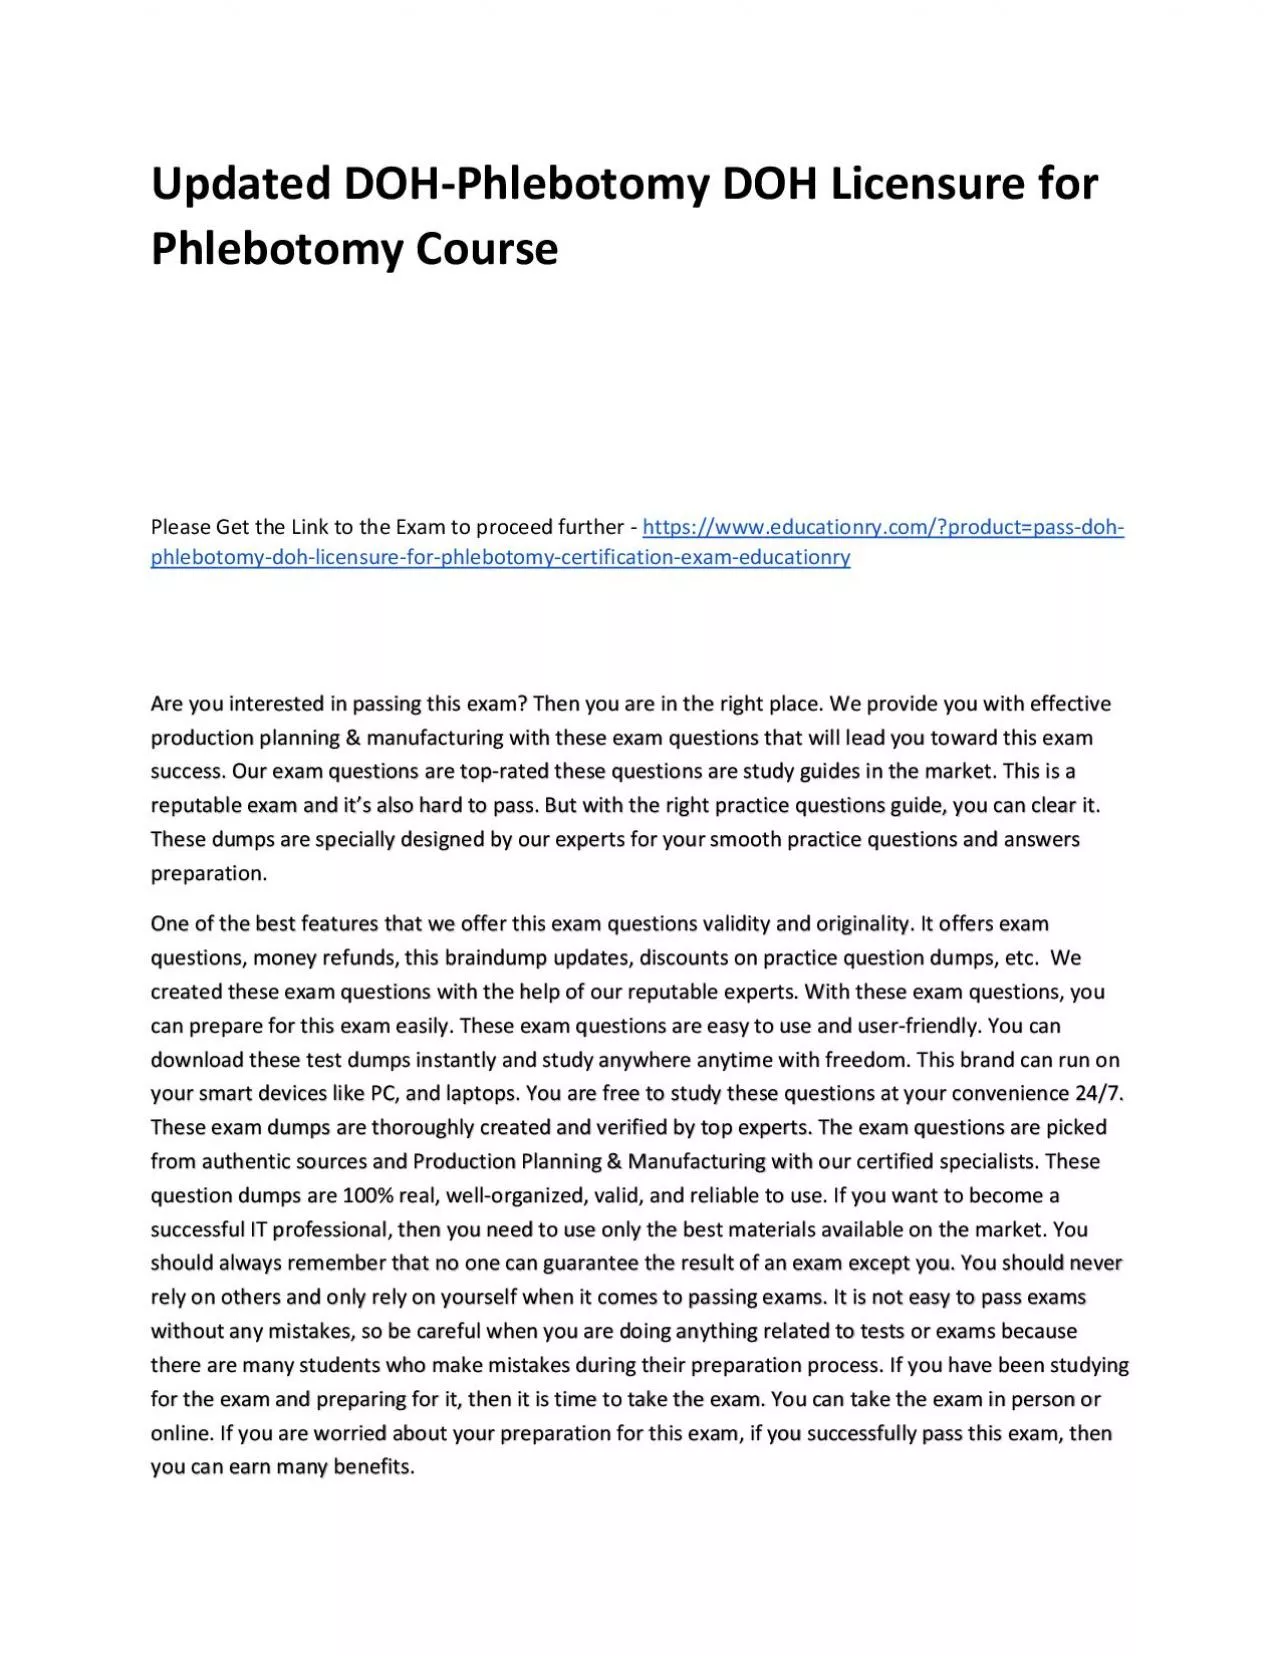 Updated DOH-Phlebotomy DOH Licensure for Phlebotomy Practice Course